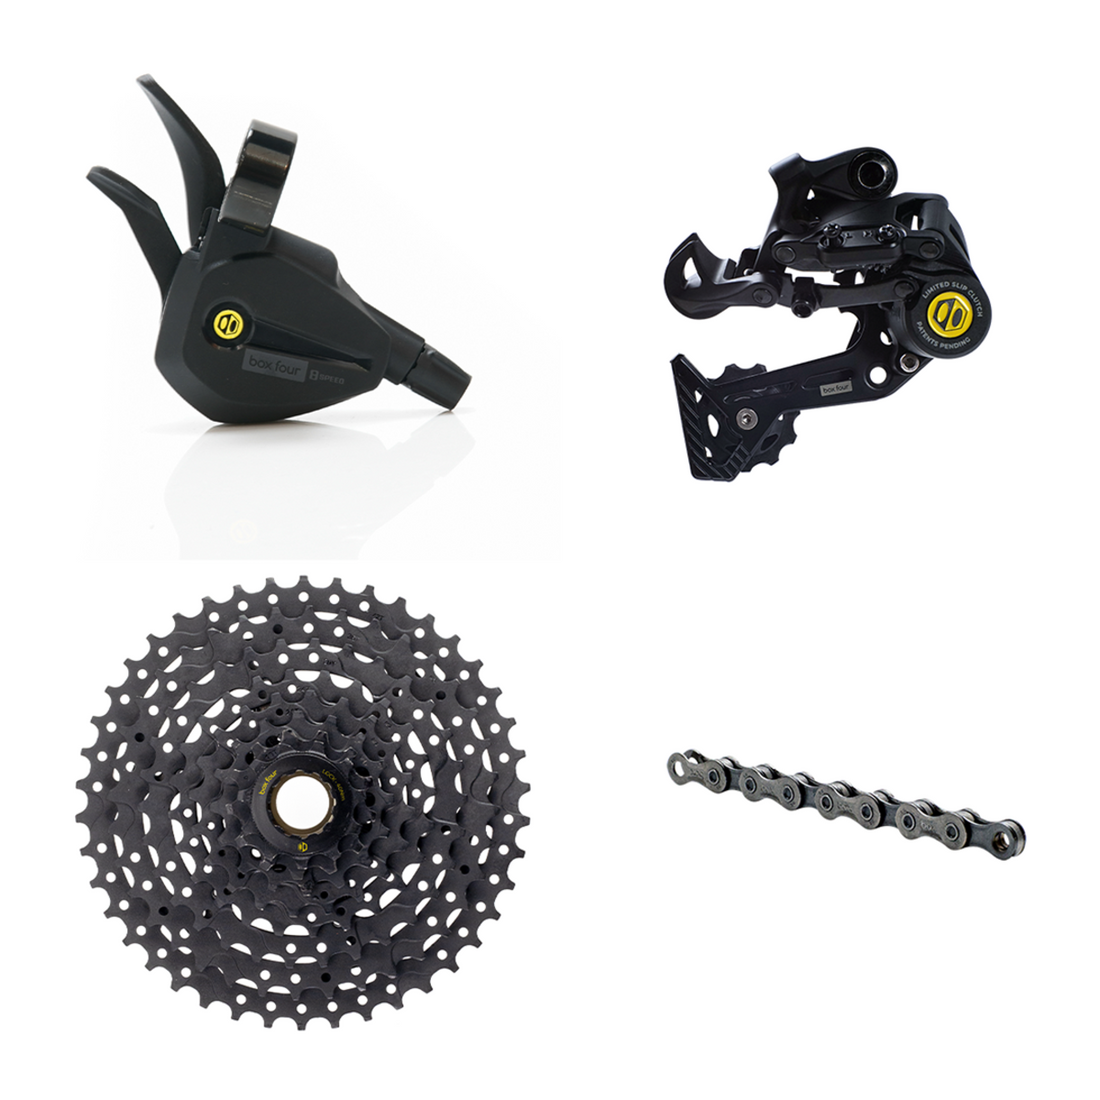 Box Four 8S Wide Multi Shift Groupset